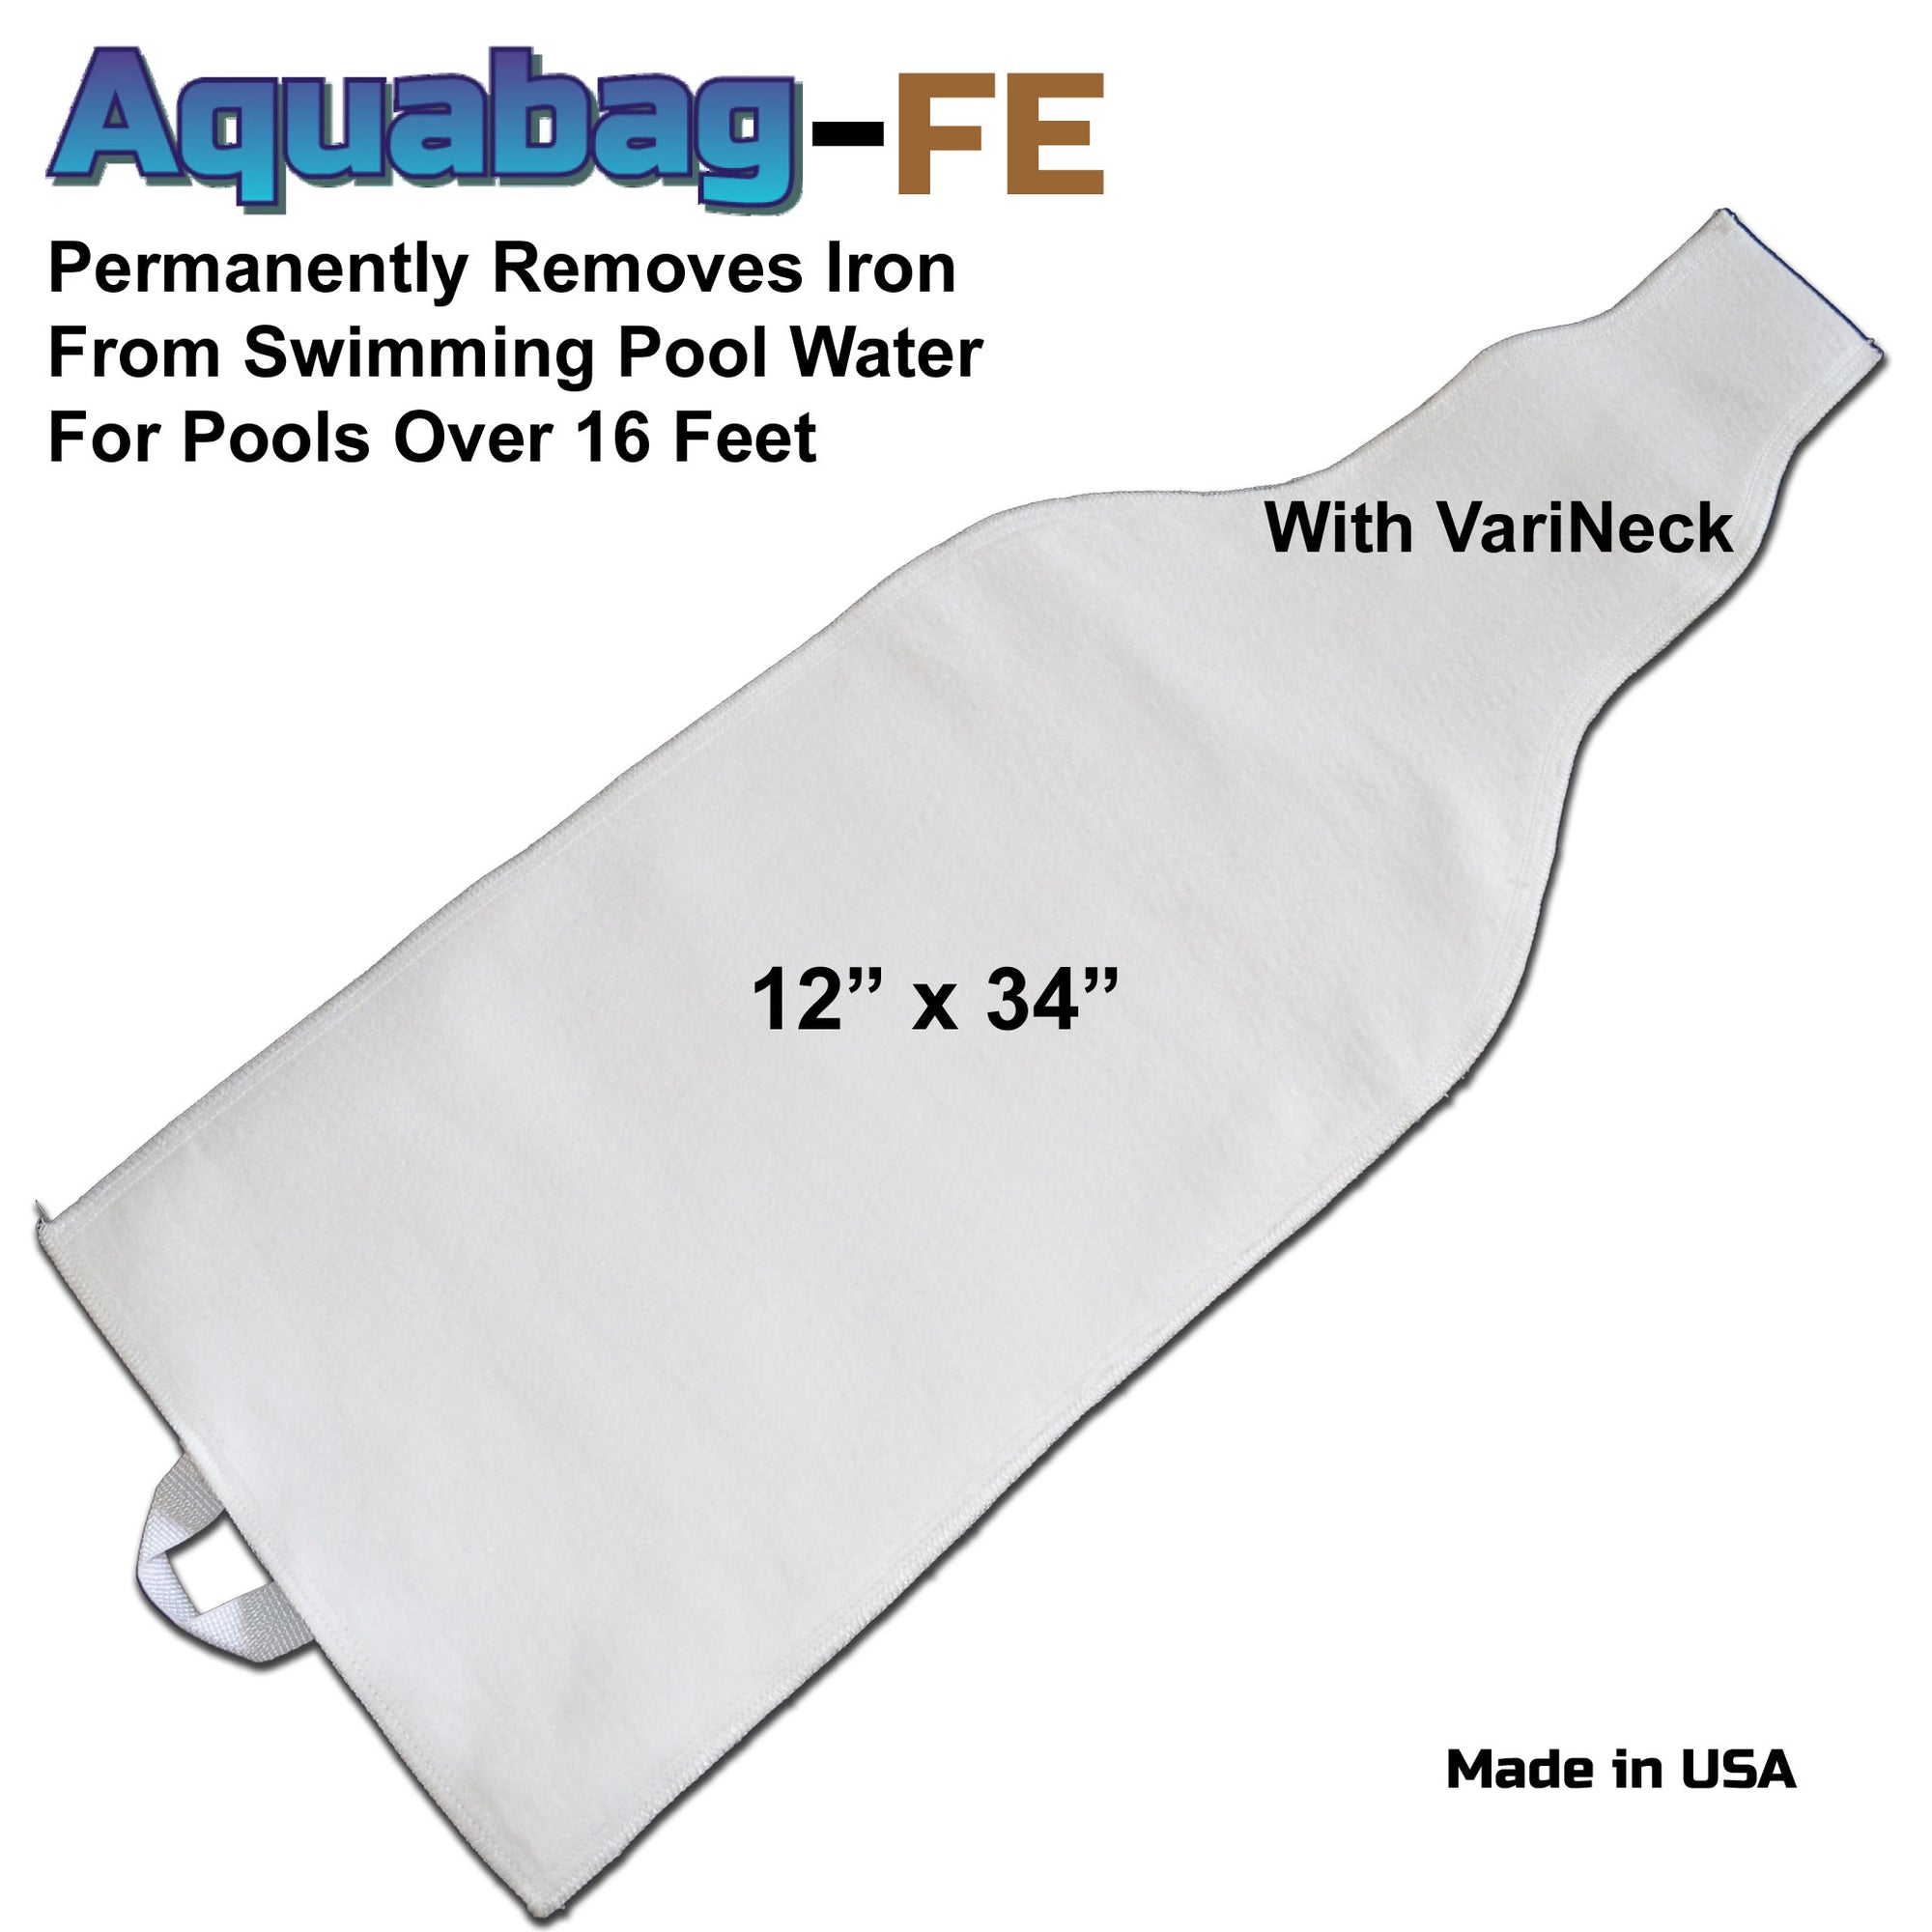 Aquabag FE Swimming Pool Iron Removal Filter 12x34 inches with stepped connection neck made in the USA